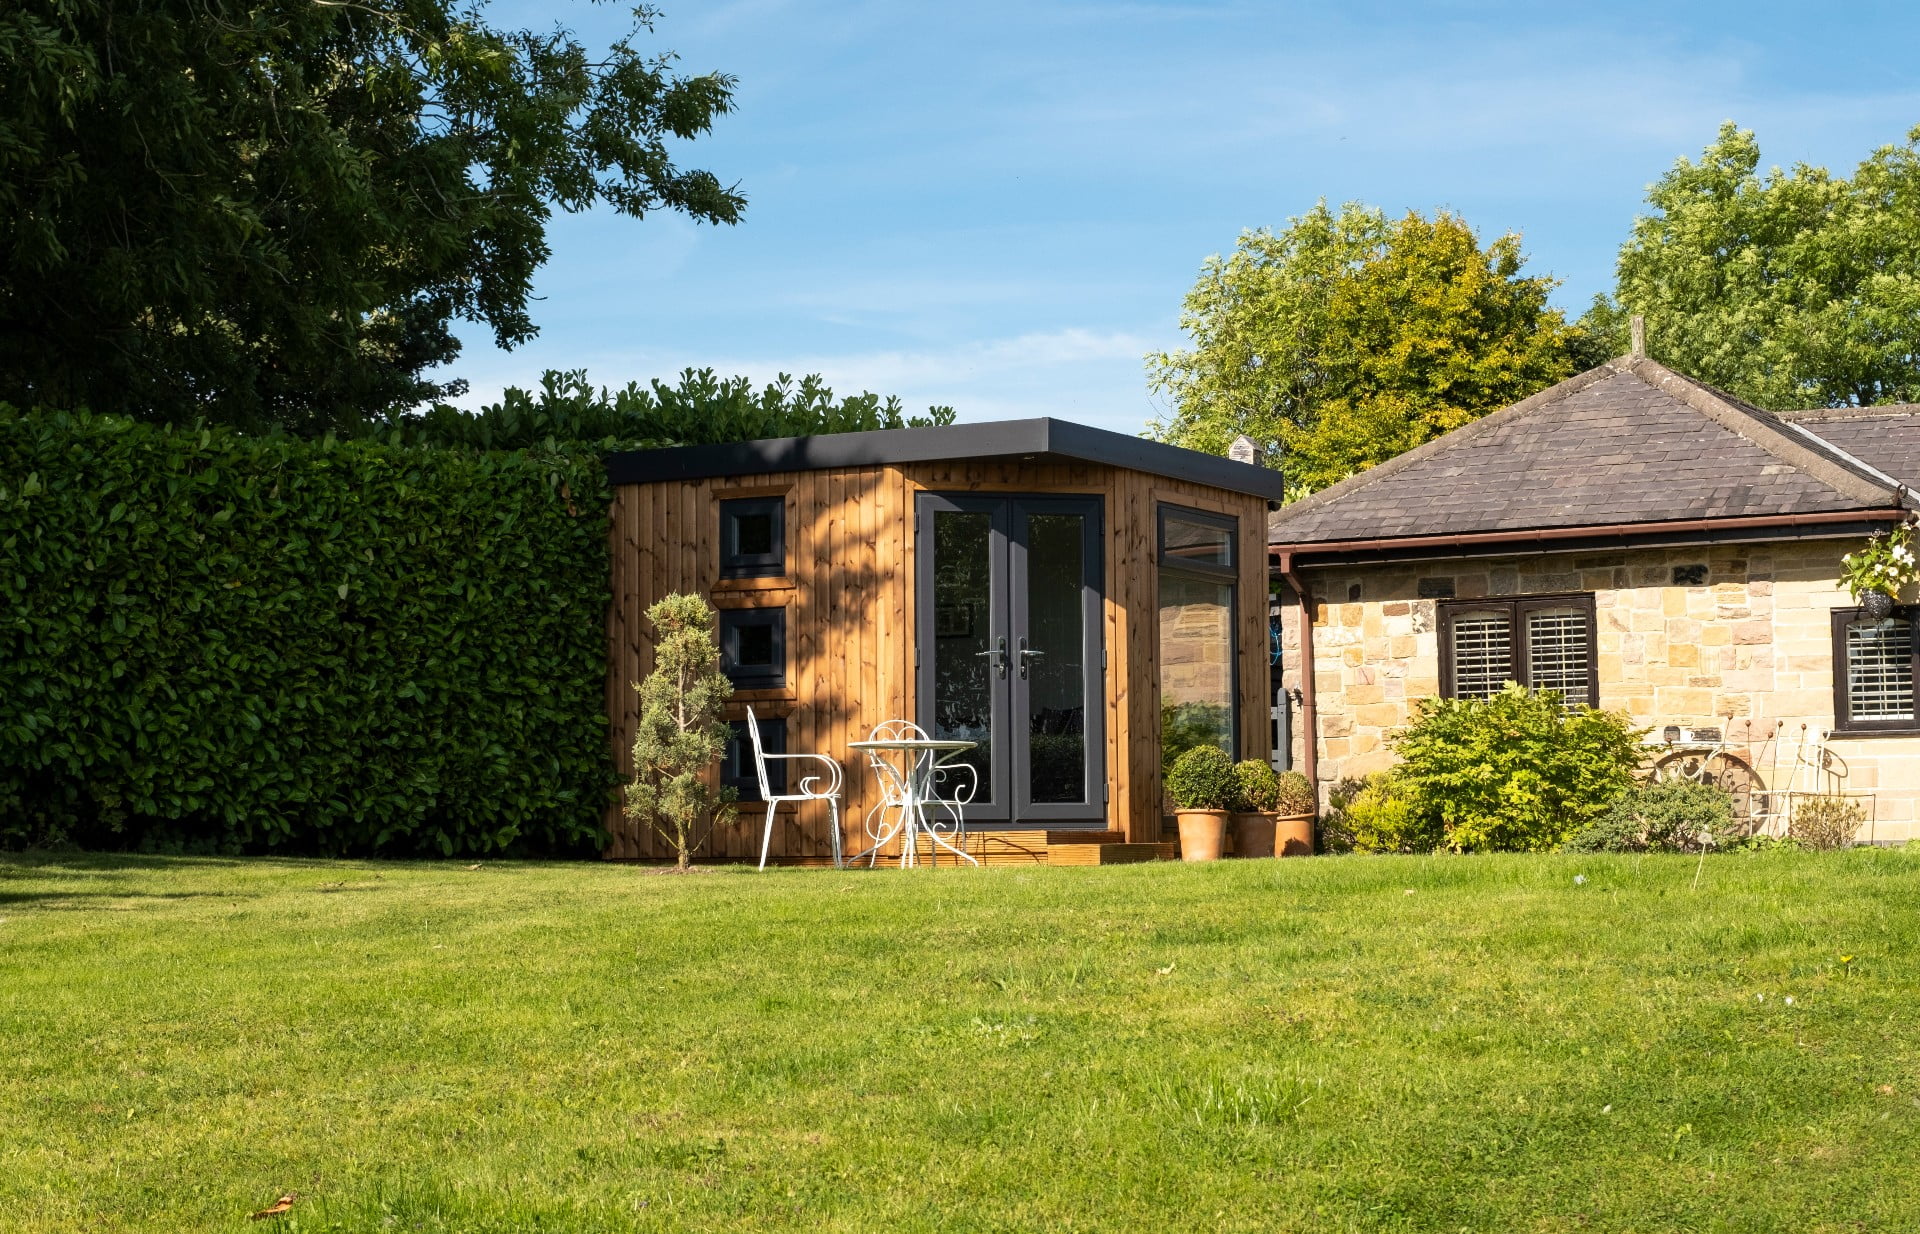 Claiming tax relief for a garden office